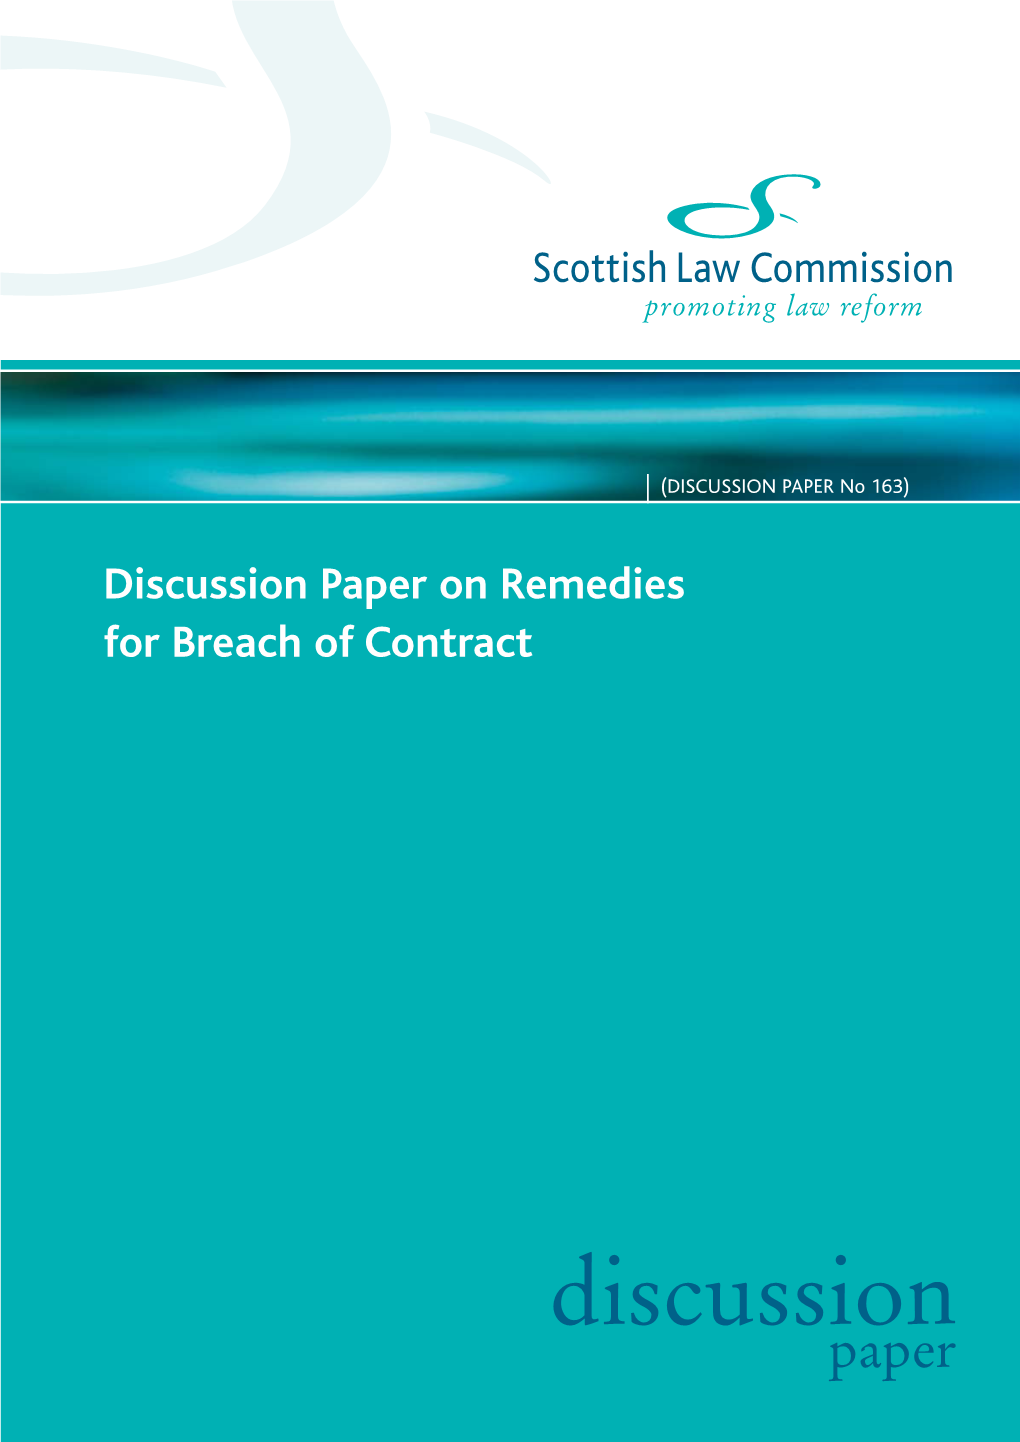 Discussion Paper on Remedies for Breach of Contract